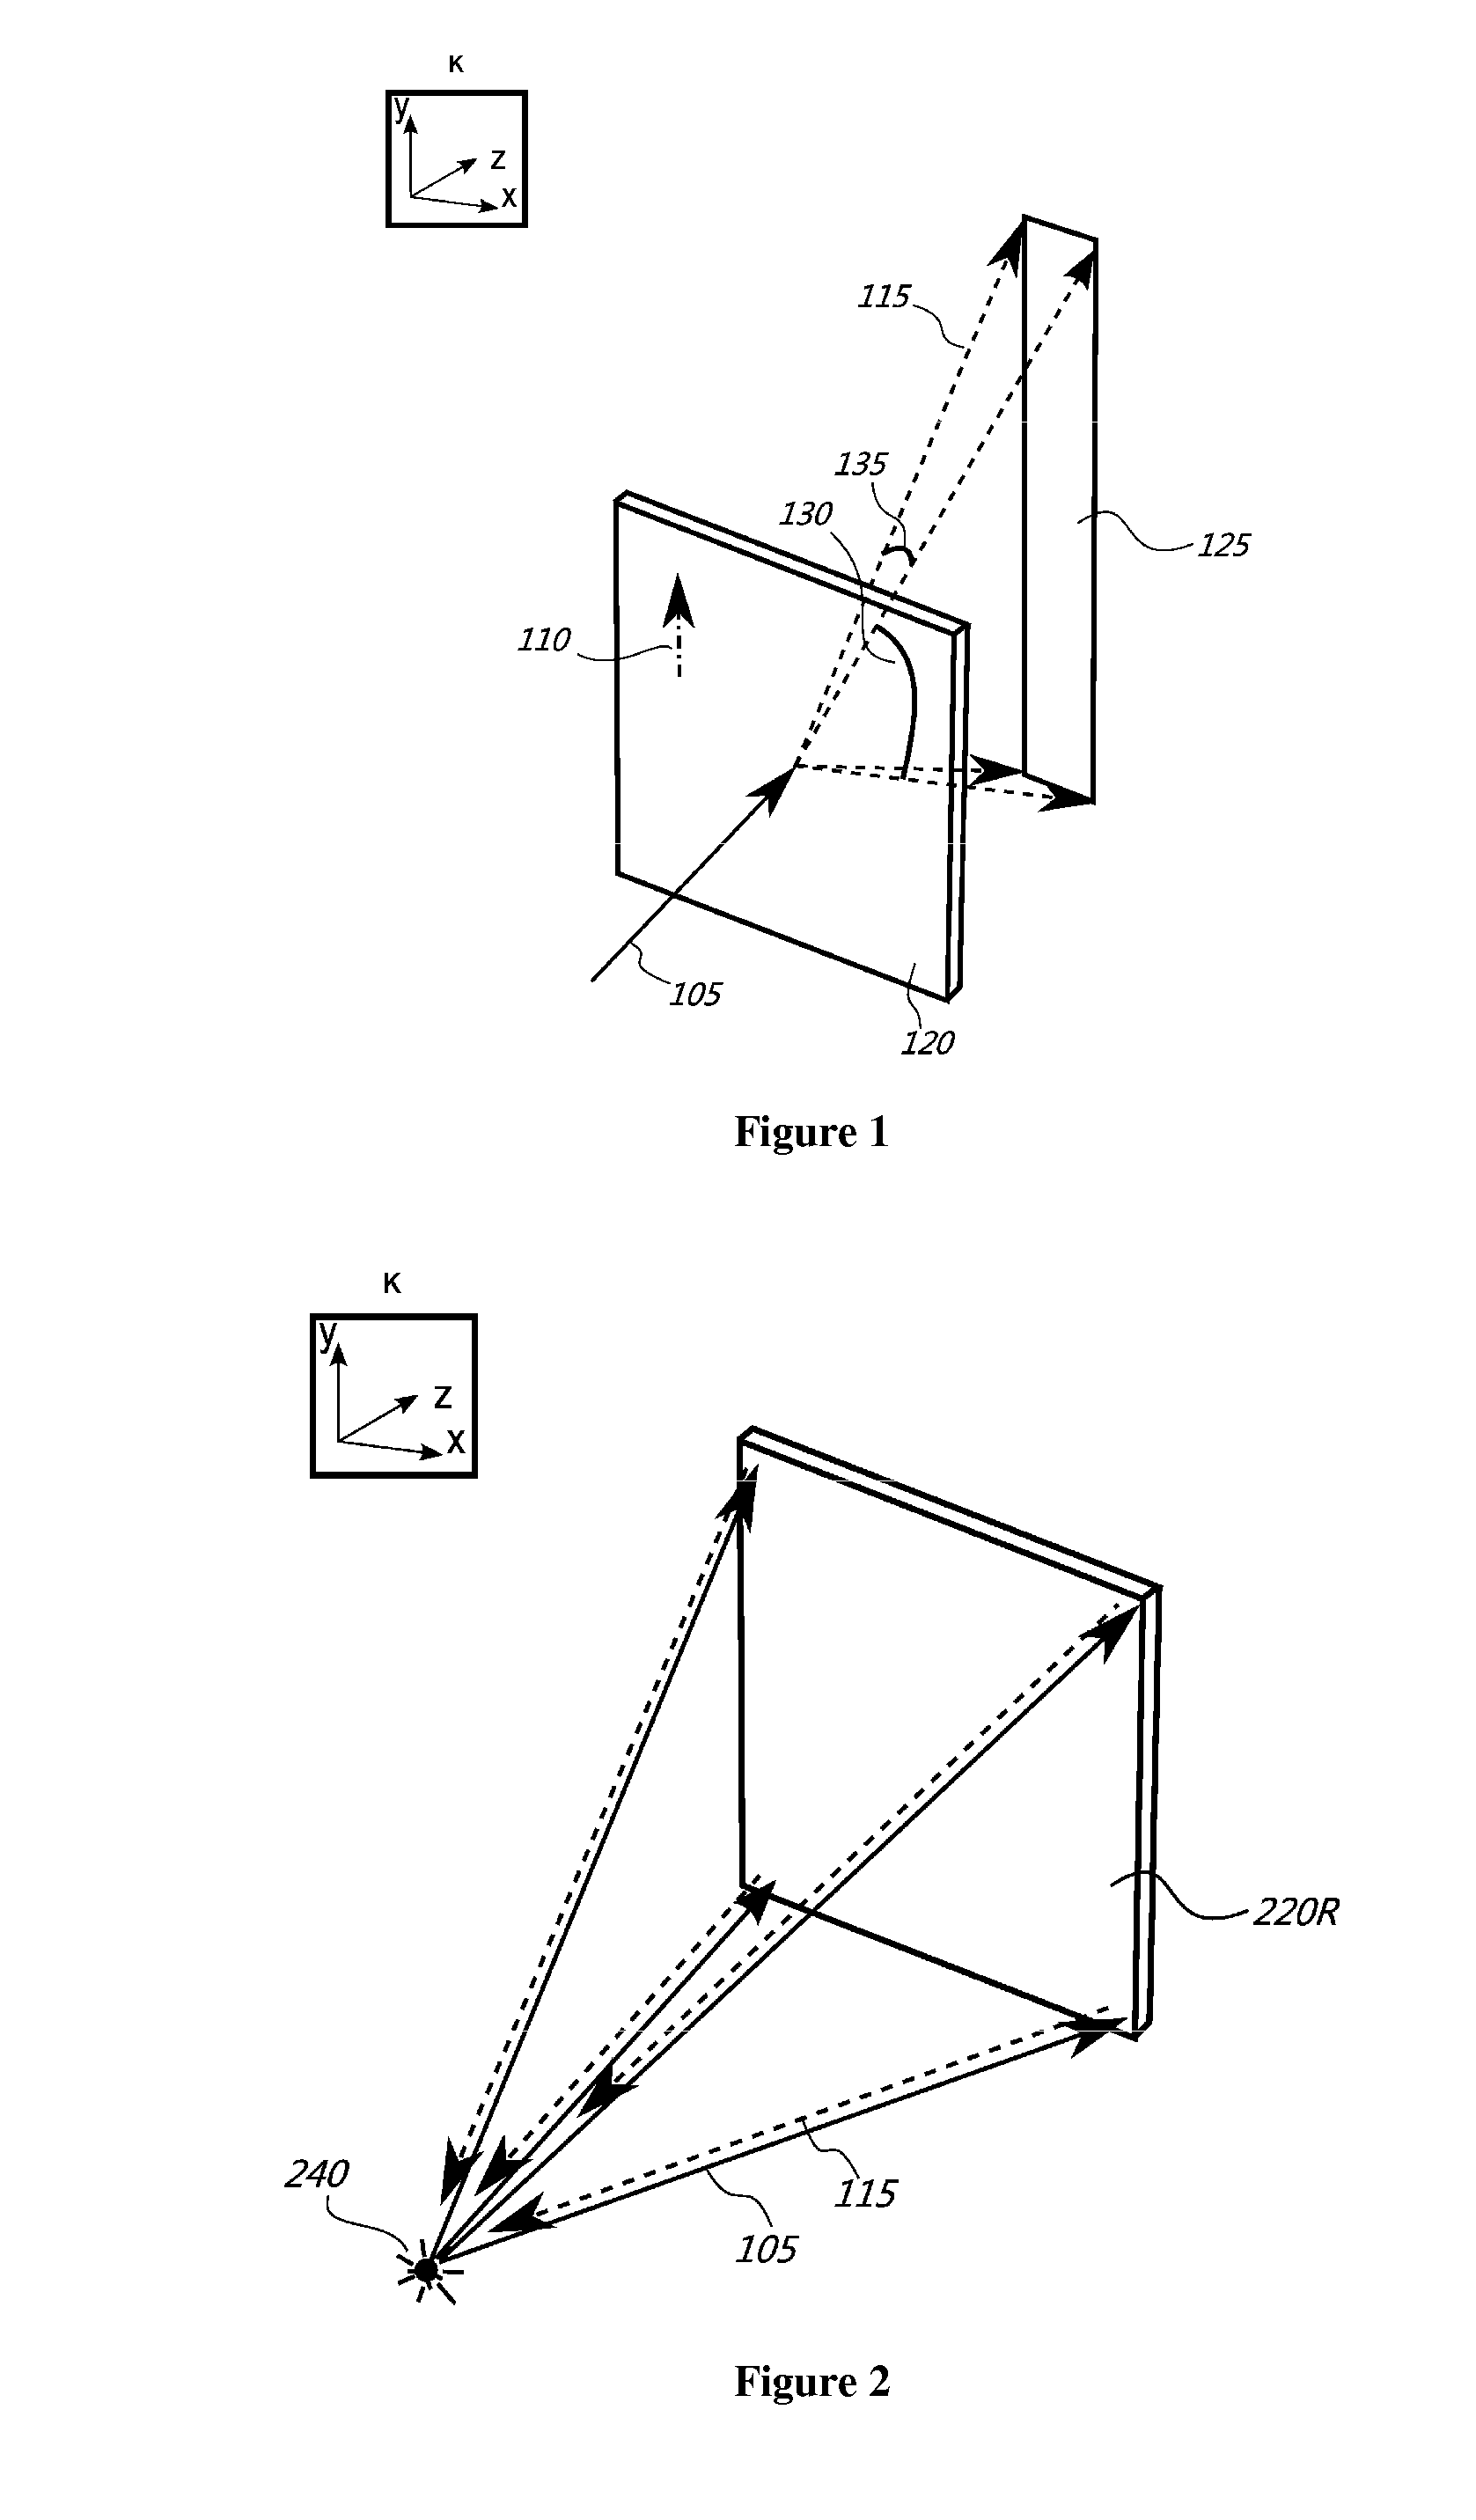 Method for autostereoscopic projection displays